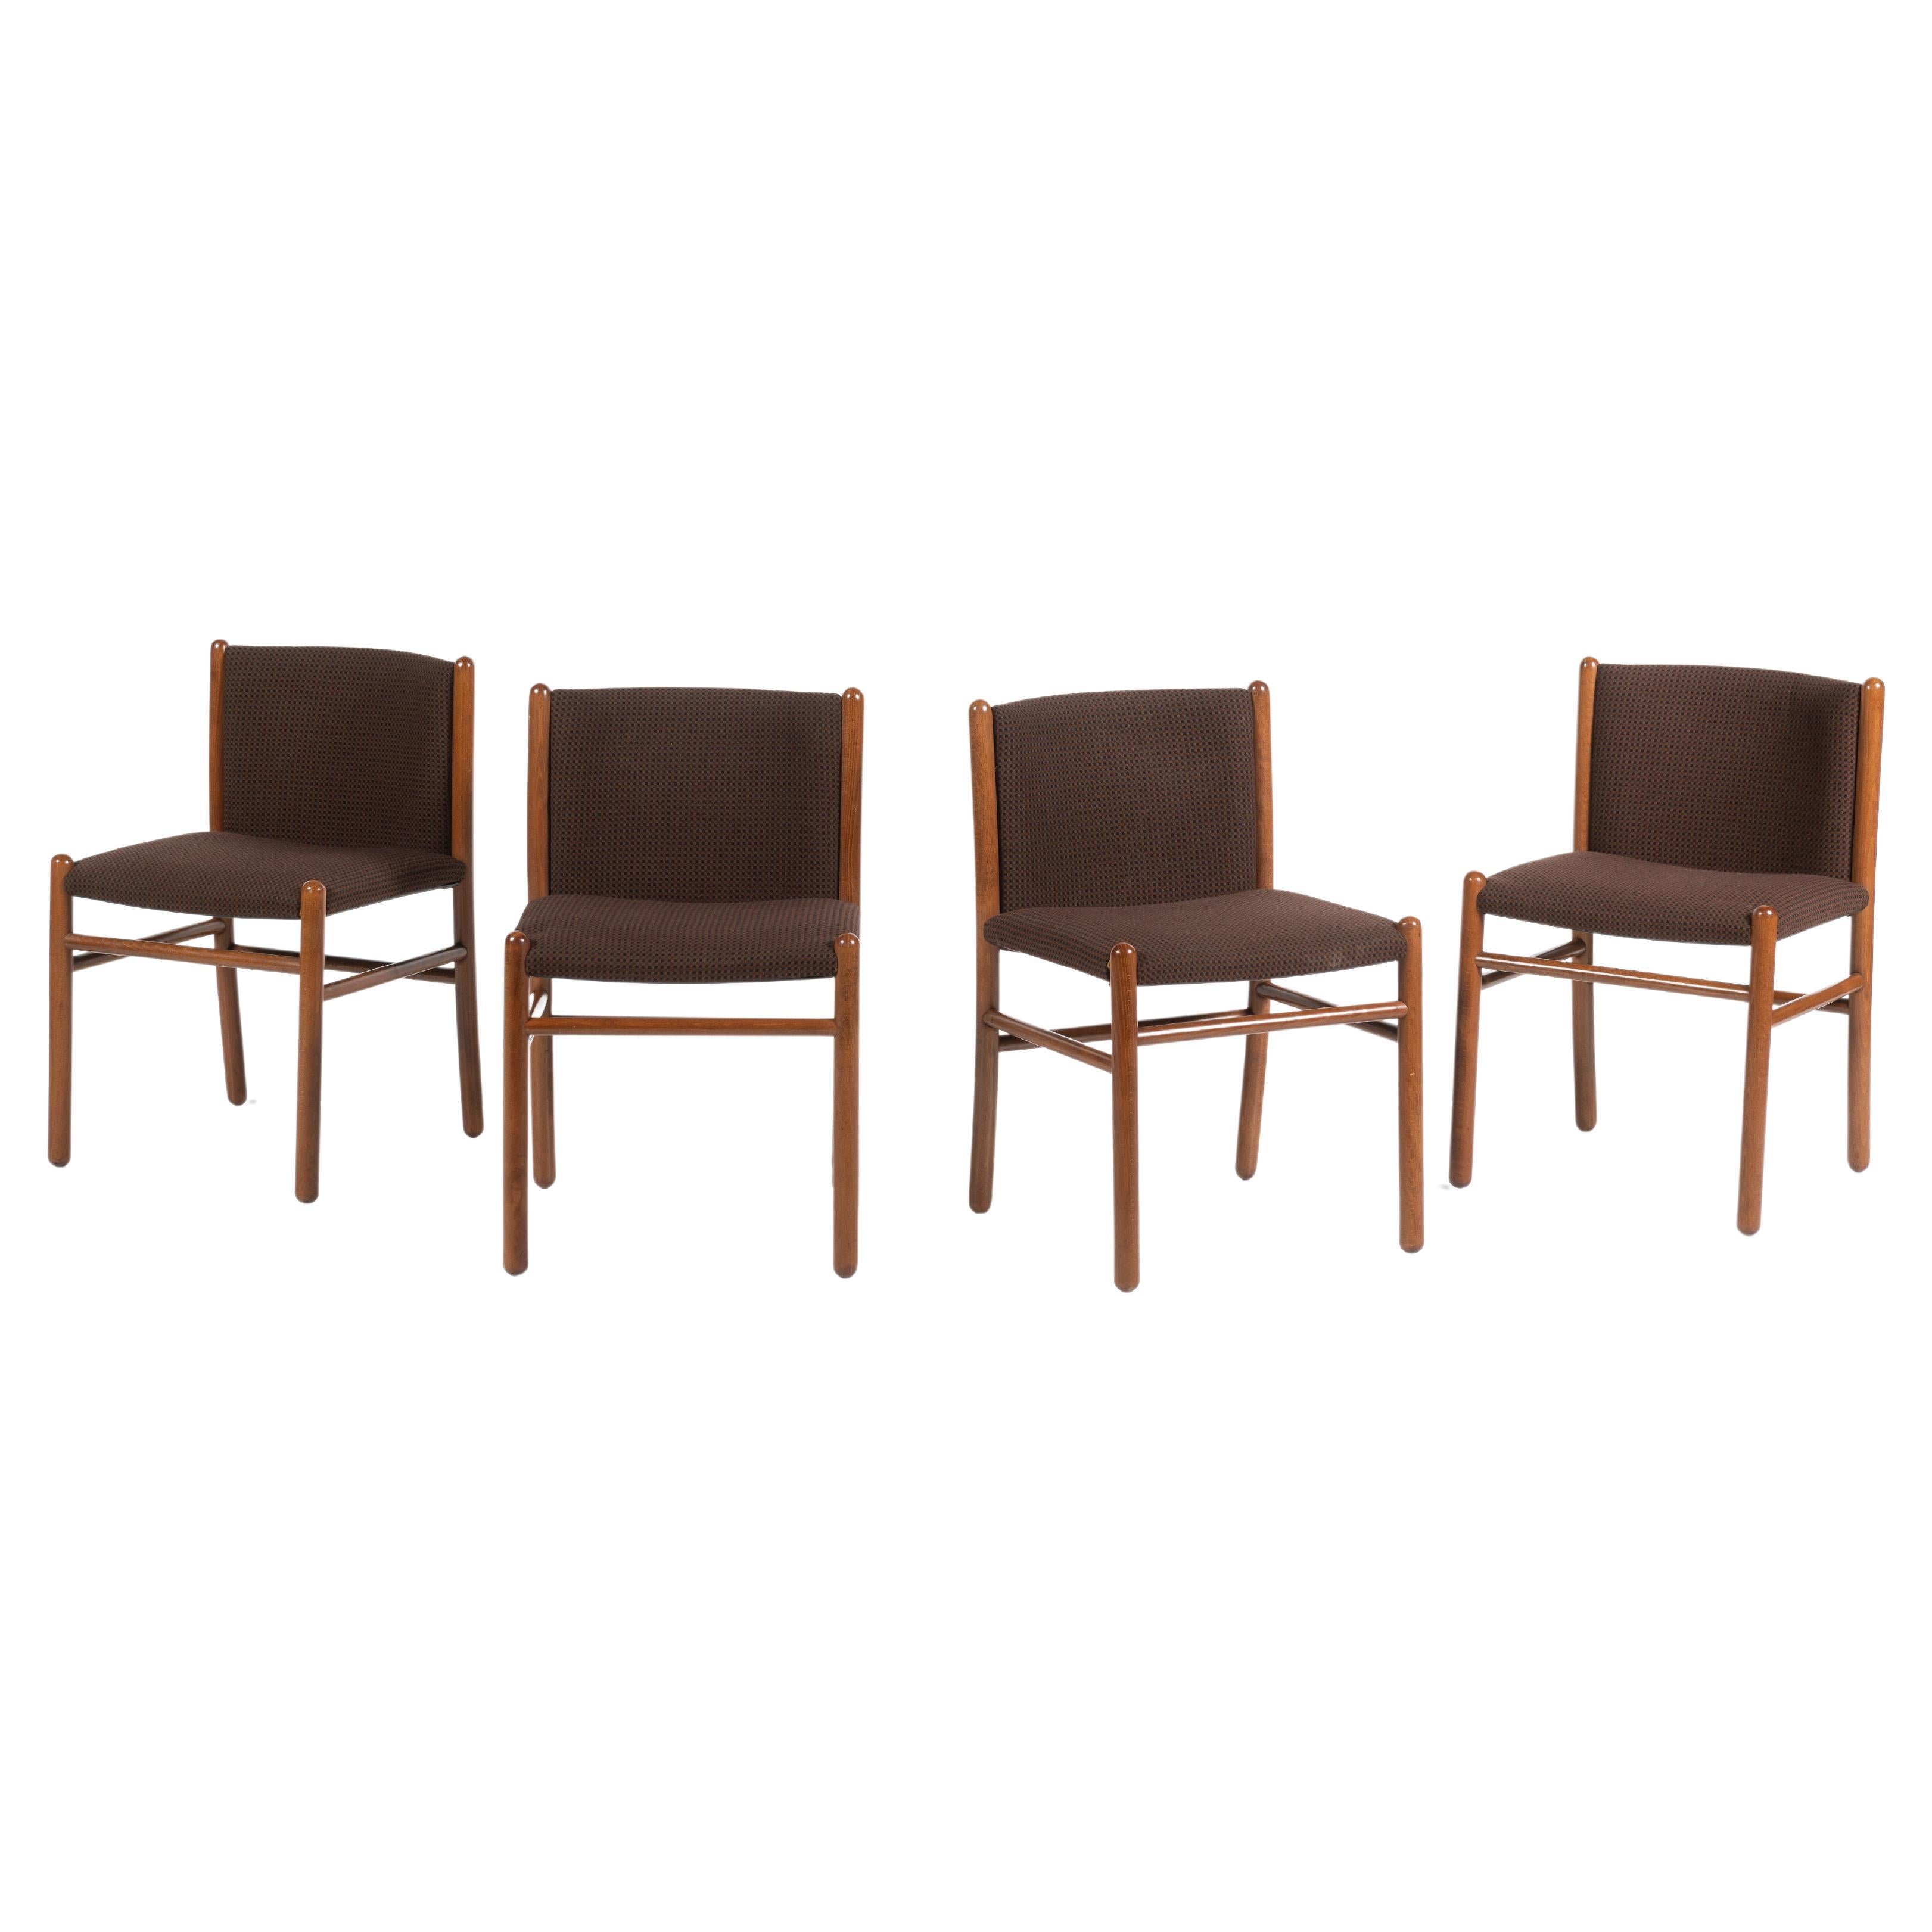 Set of Four Mid-Century Modern Dining Chairs, Gianfranco Frattini, Italy, 1960s For Sale